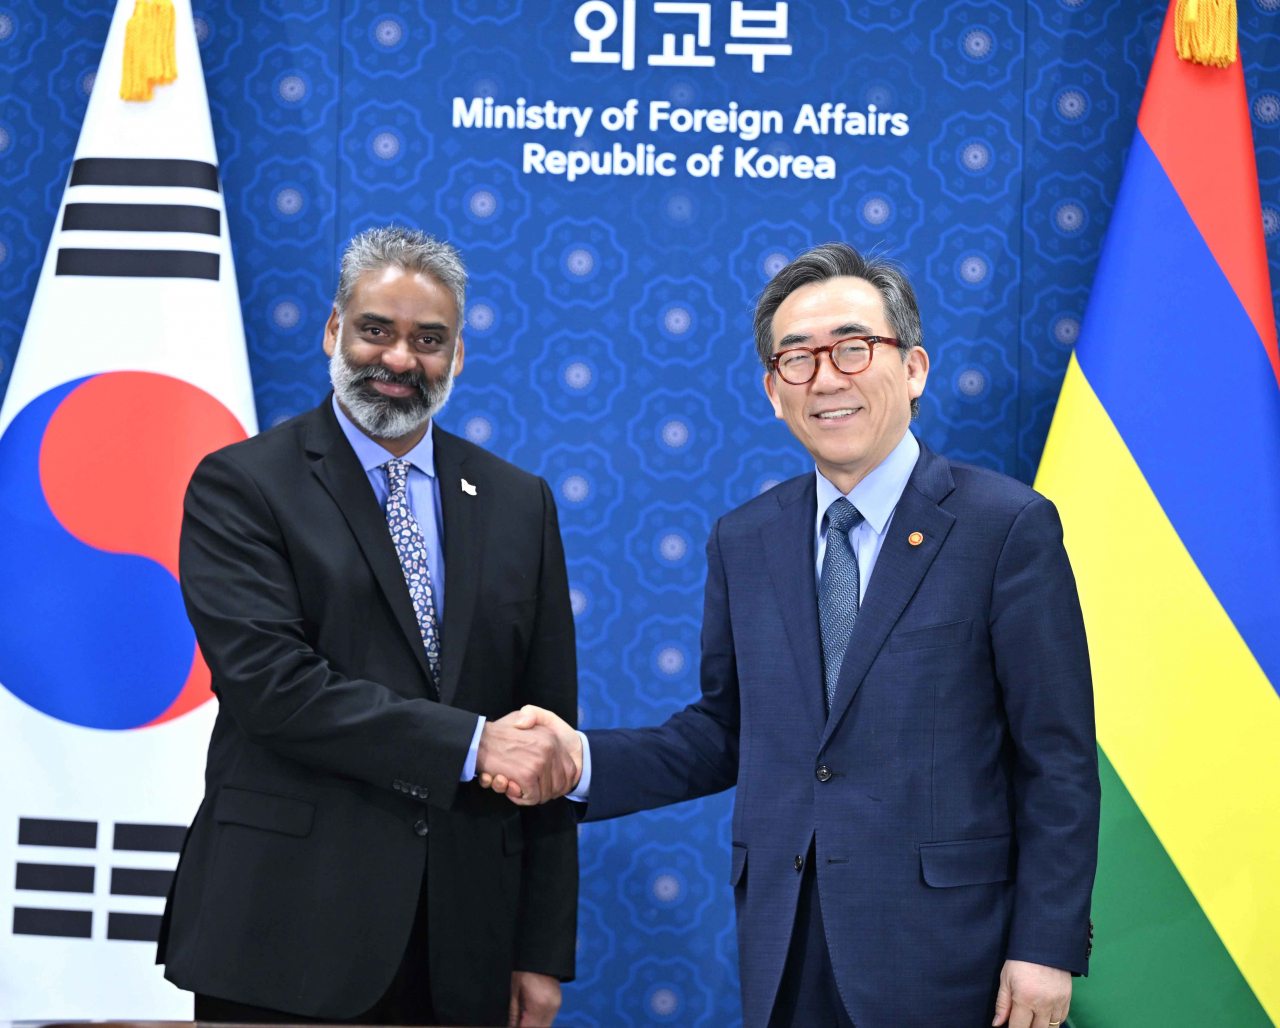 South Korean Foreign Minister Cho Tae-yul (right) shakes hands with Mauritius Foreign Minister Maneesh Gobin during their bilateral talks at the Foreign Ministry building in Seoul. The meeting take place during Gobin's visit to South Korea to attend the third Summit for Democracy hosted by the Yoon Suk Yeol government in Seoul. (Ministry of Foreign Affairs)